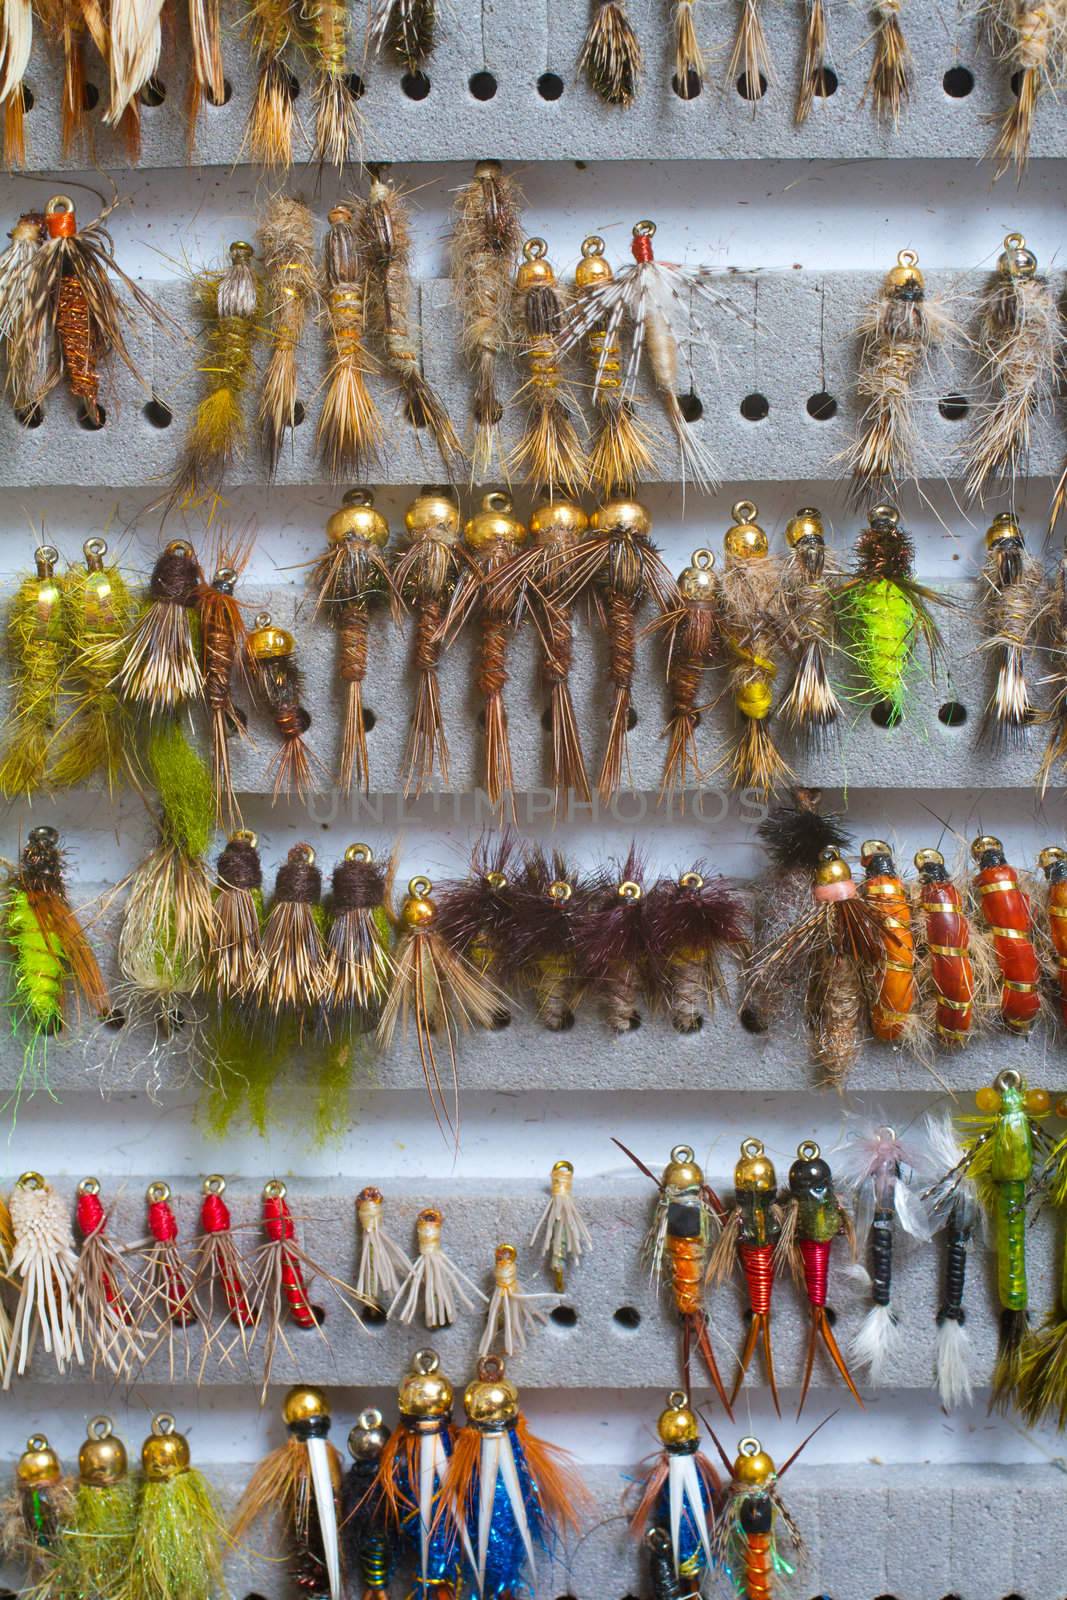 Nymphs and streamers are in this fly fishing box showing the variety of flies used to catch fish in this recreational pursuit.